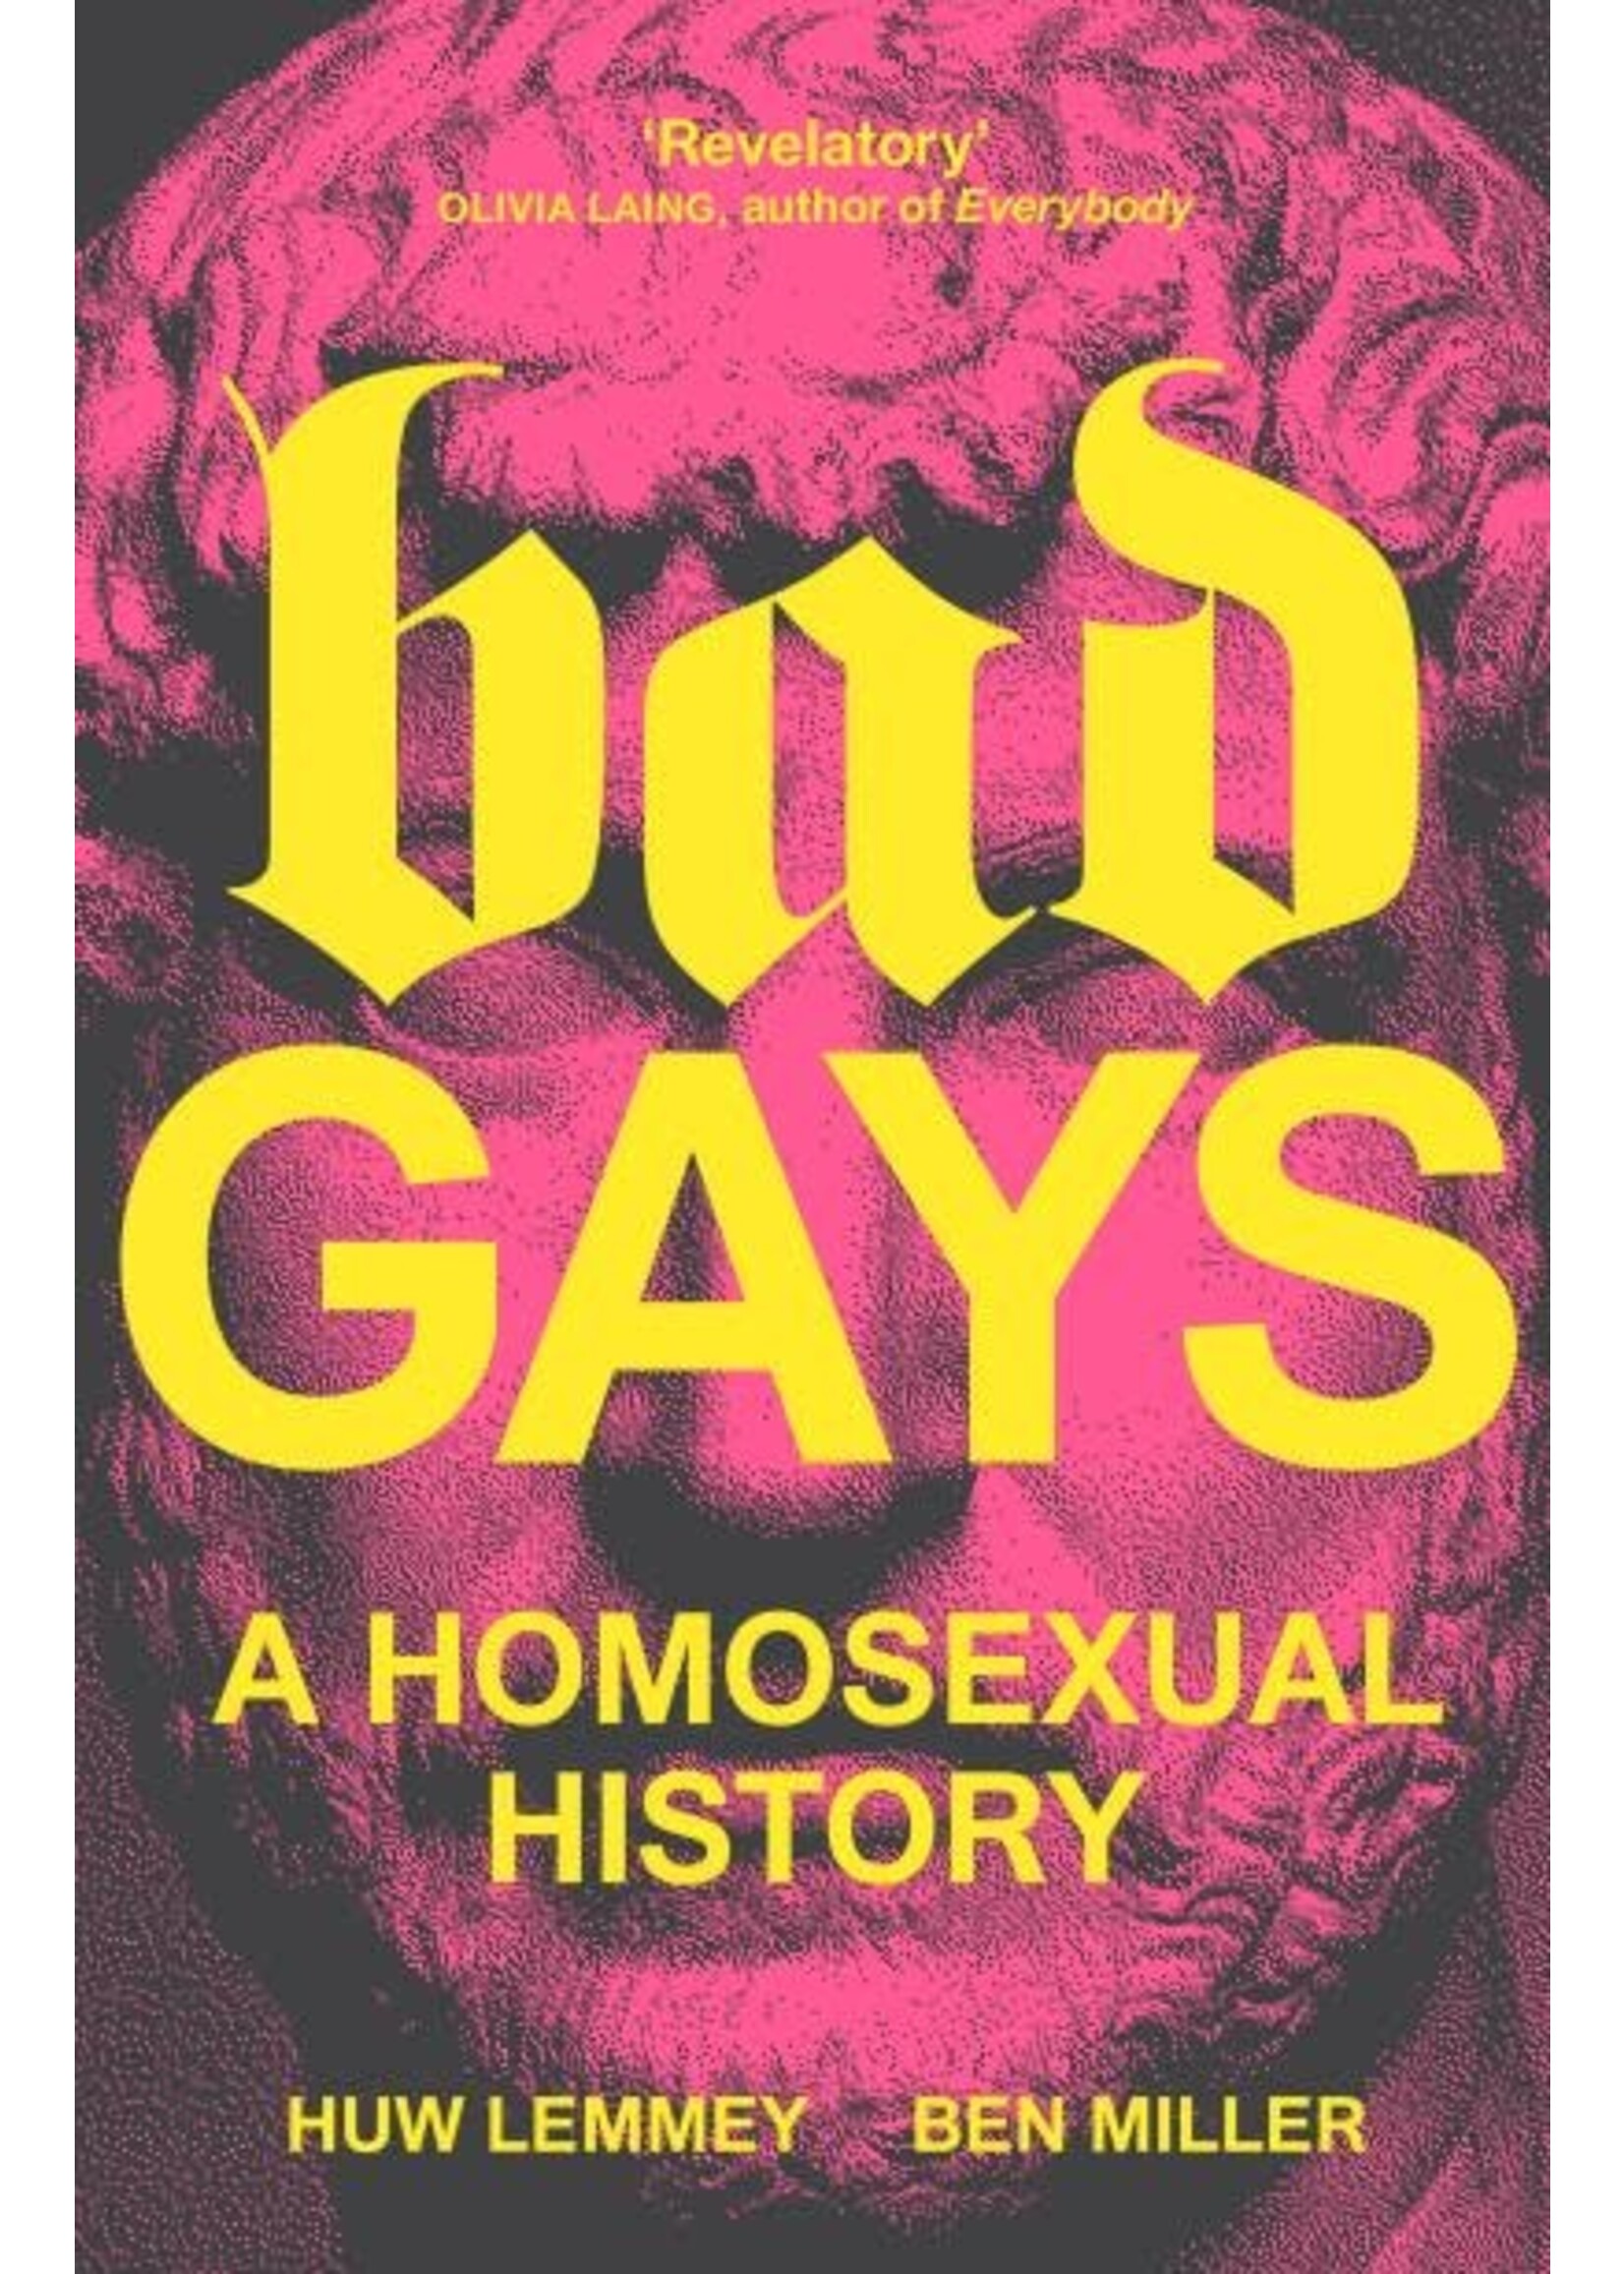 Bad Gays: A Homosexual History by Huw Lemmey by Ben Miller